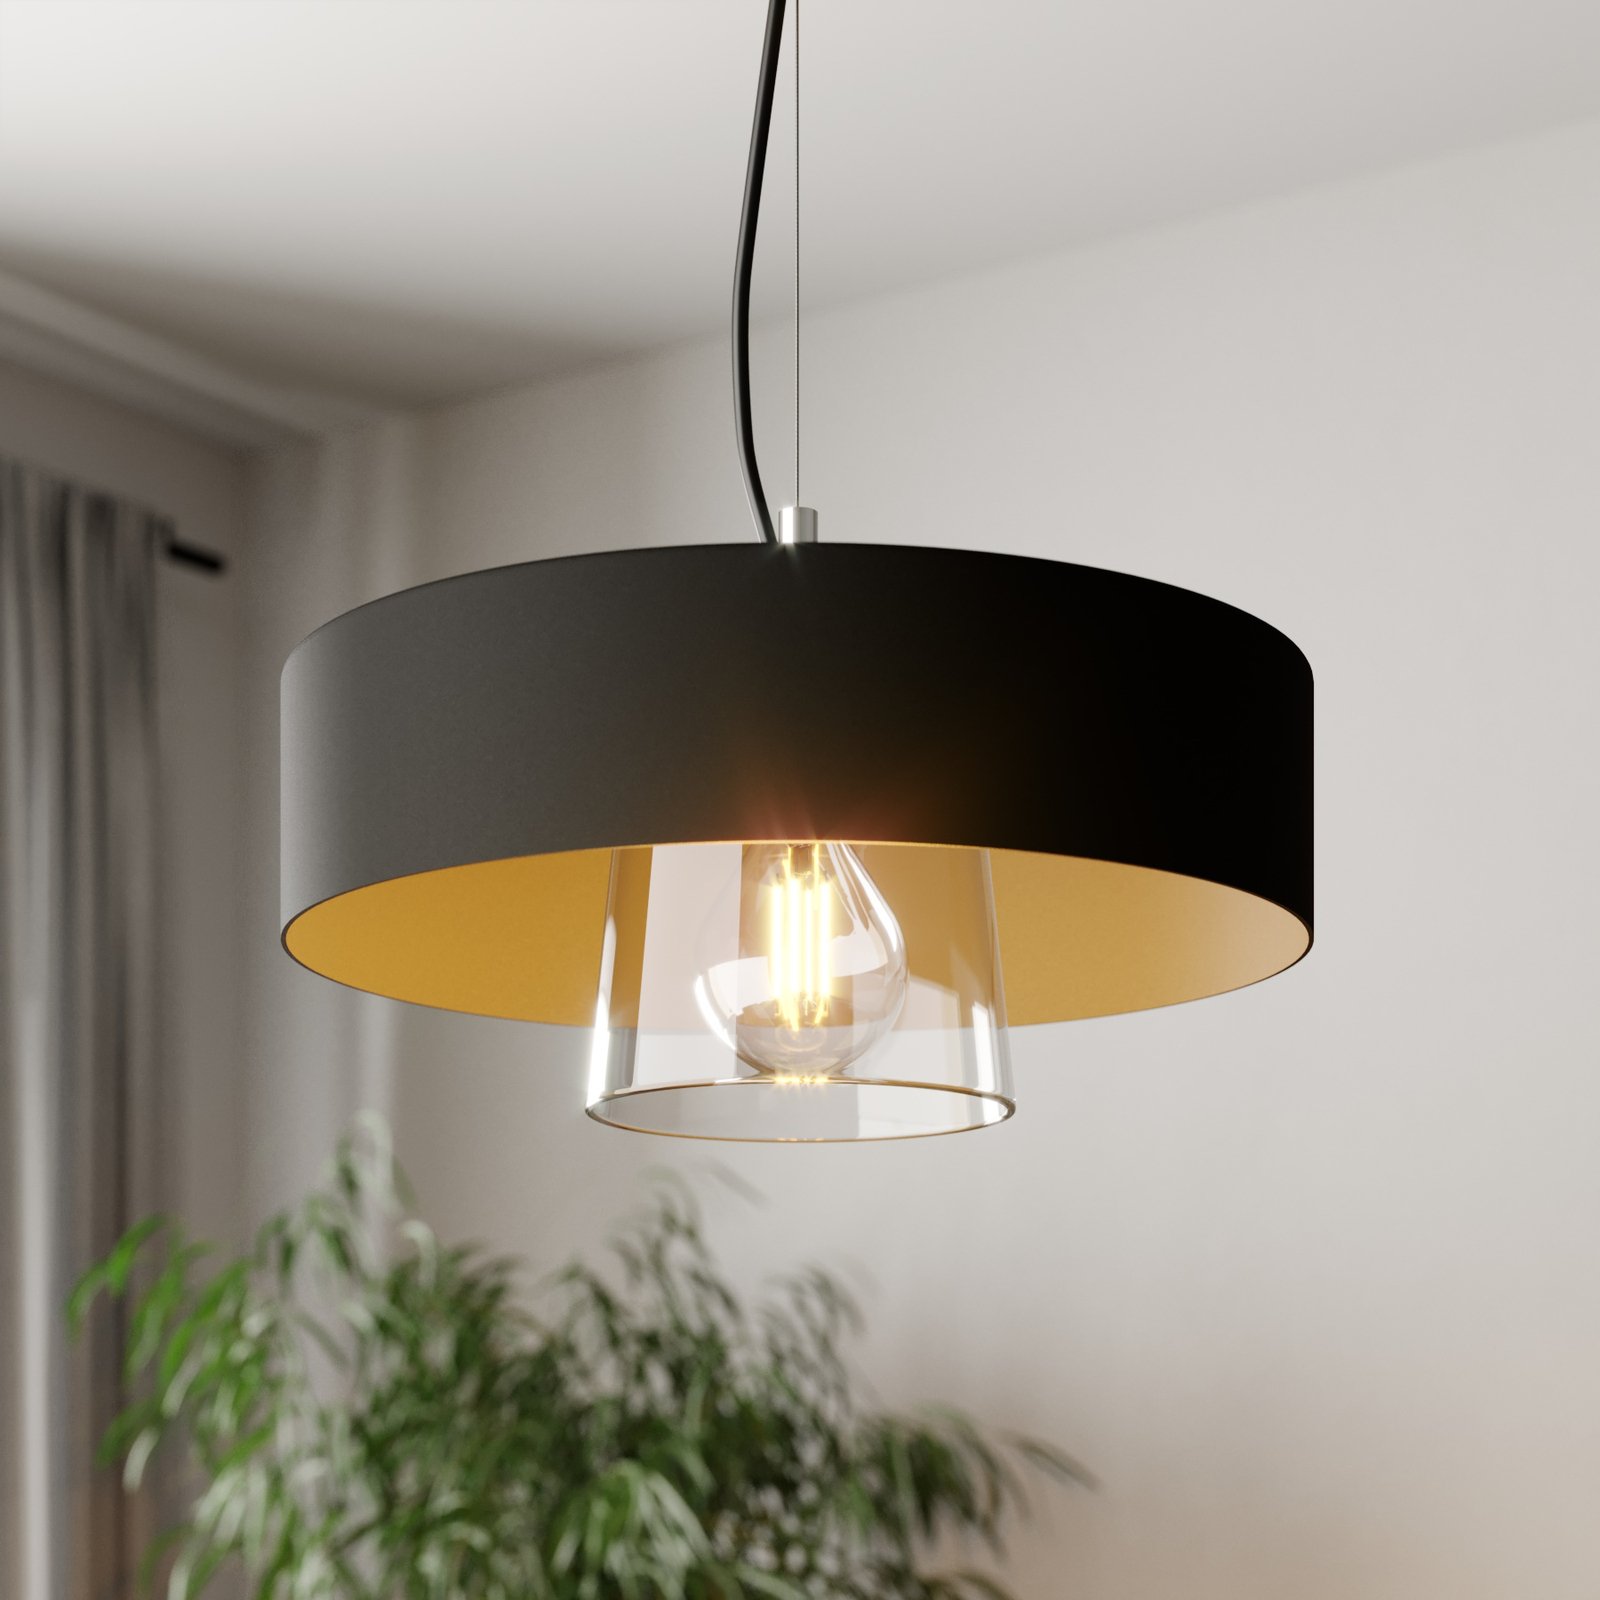 Babilon hanging light with double lampshade